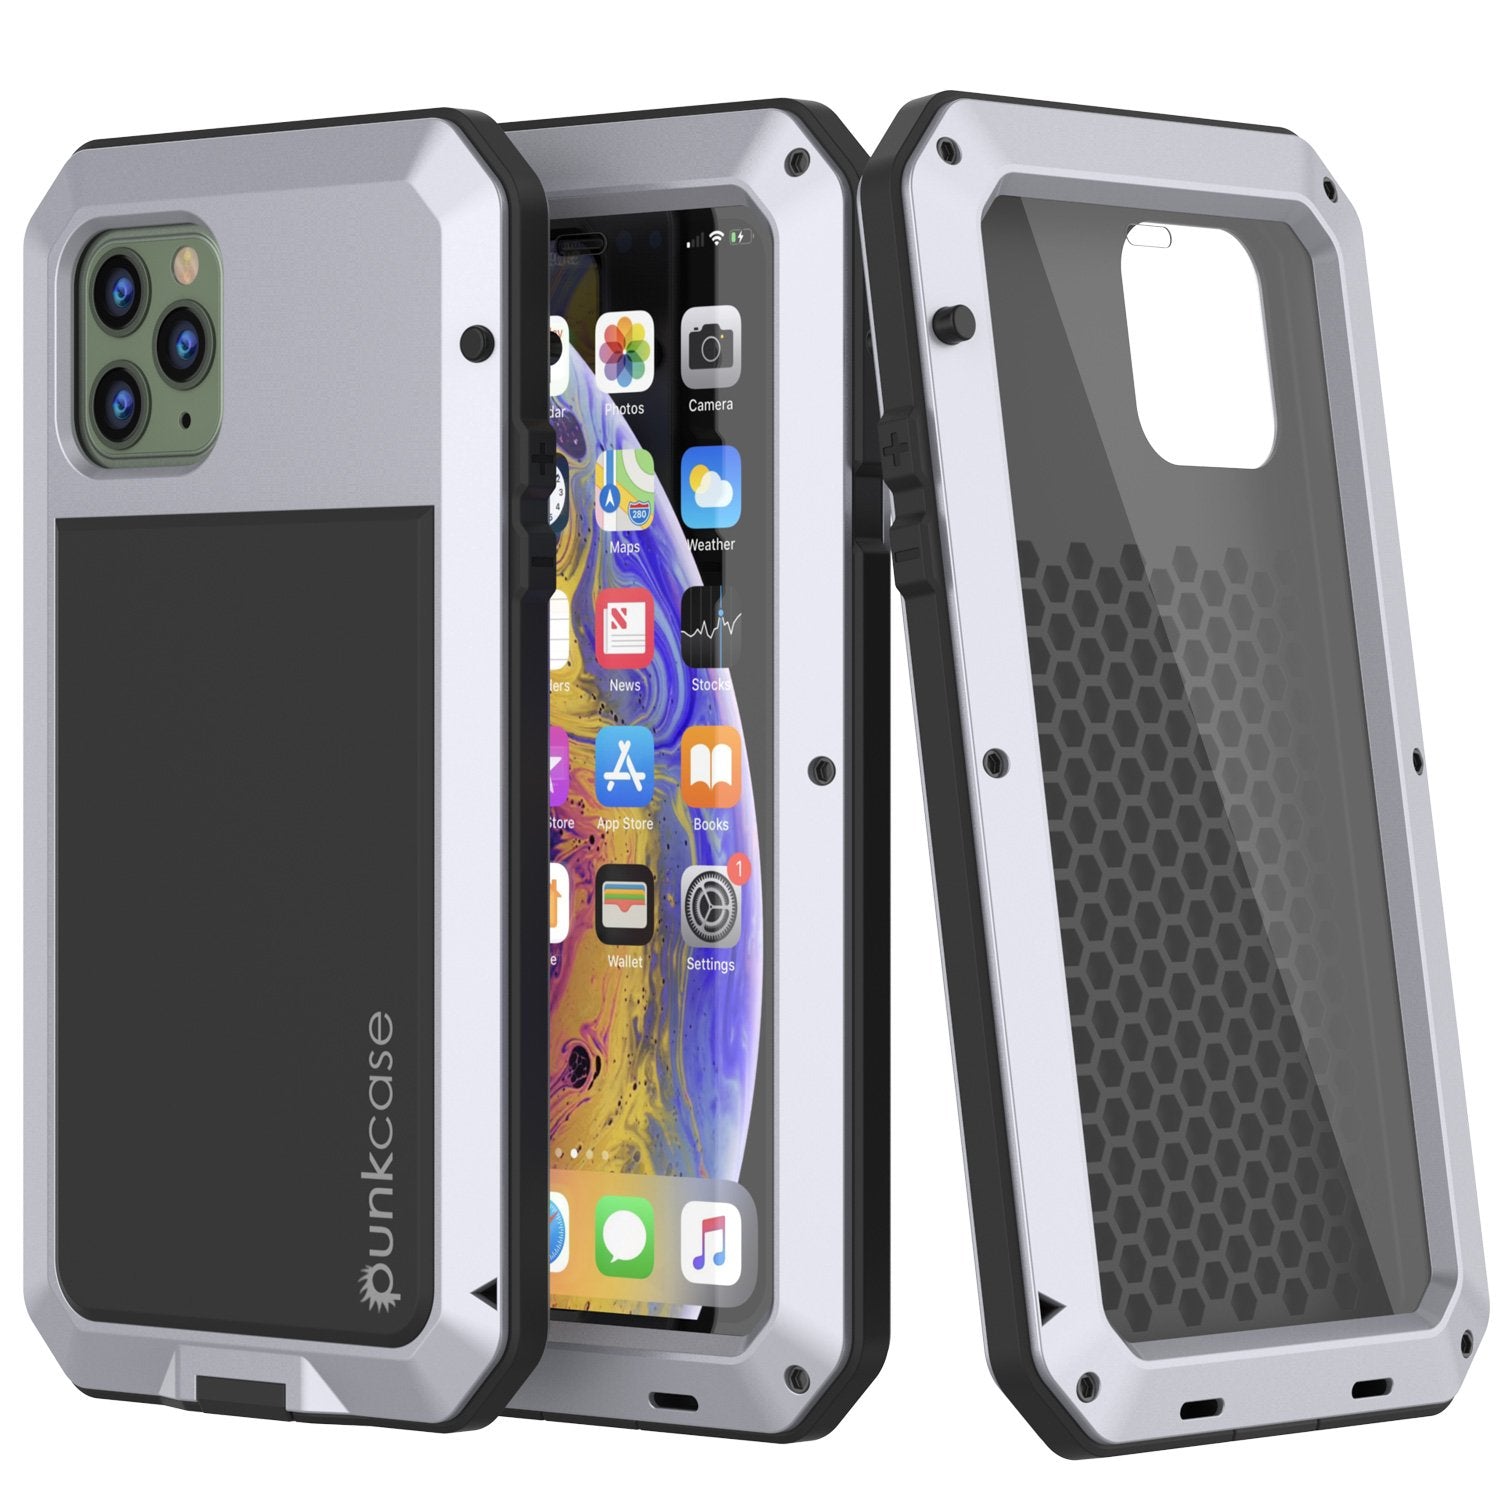 iPhone 11 Pro Max Metal Case, Heavy Duty Military Grade Armor Cover [shock proof] Full Body Hard [White]